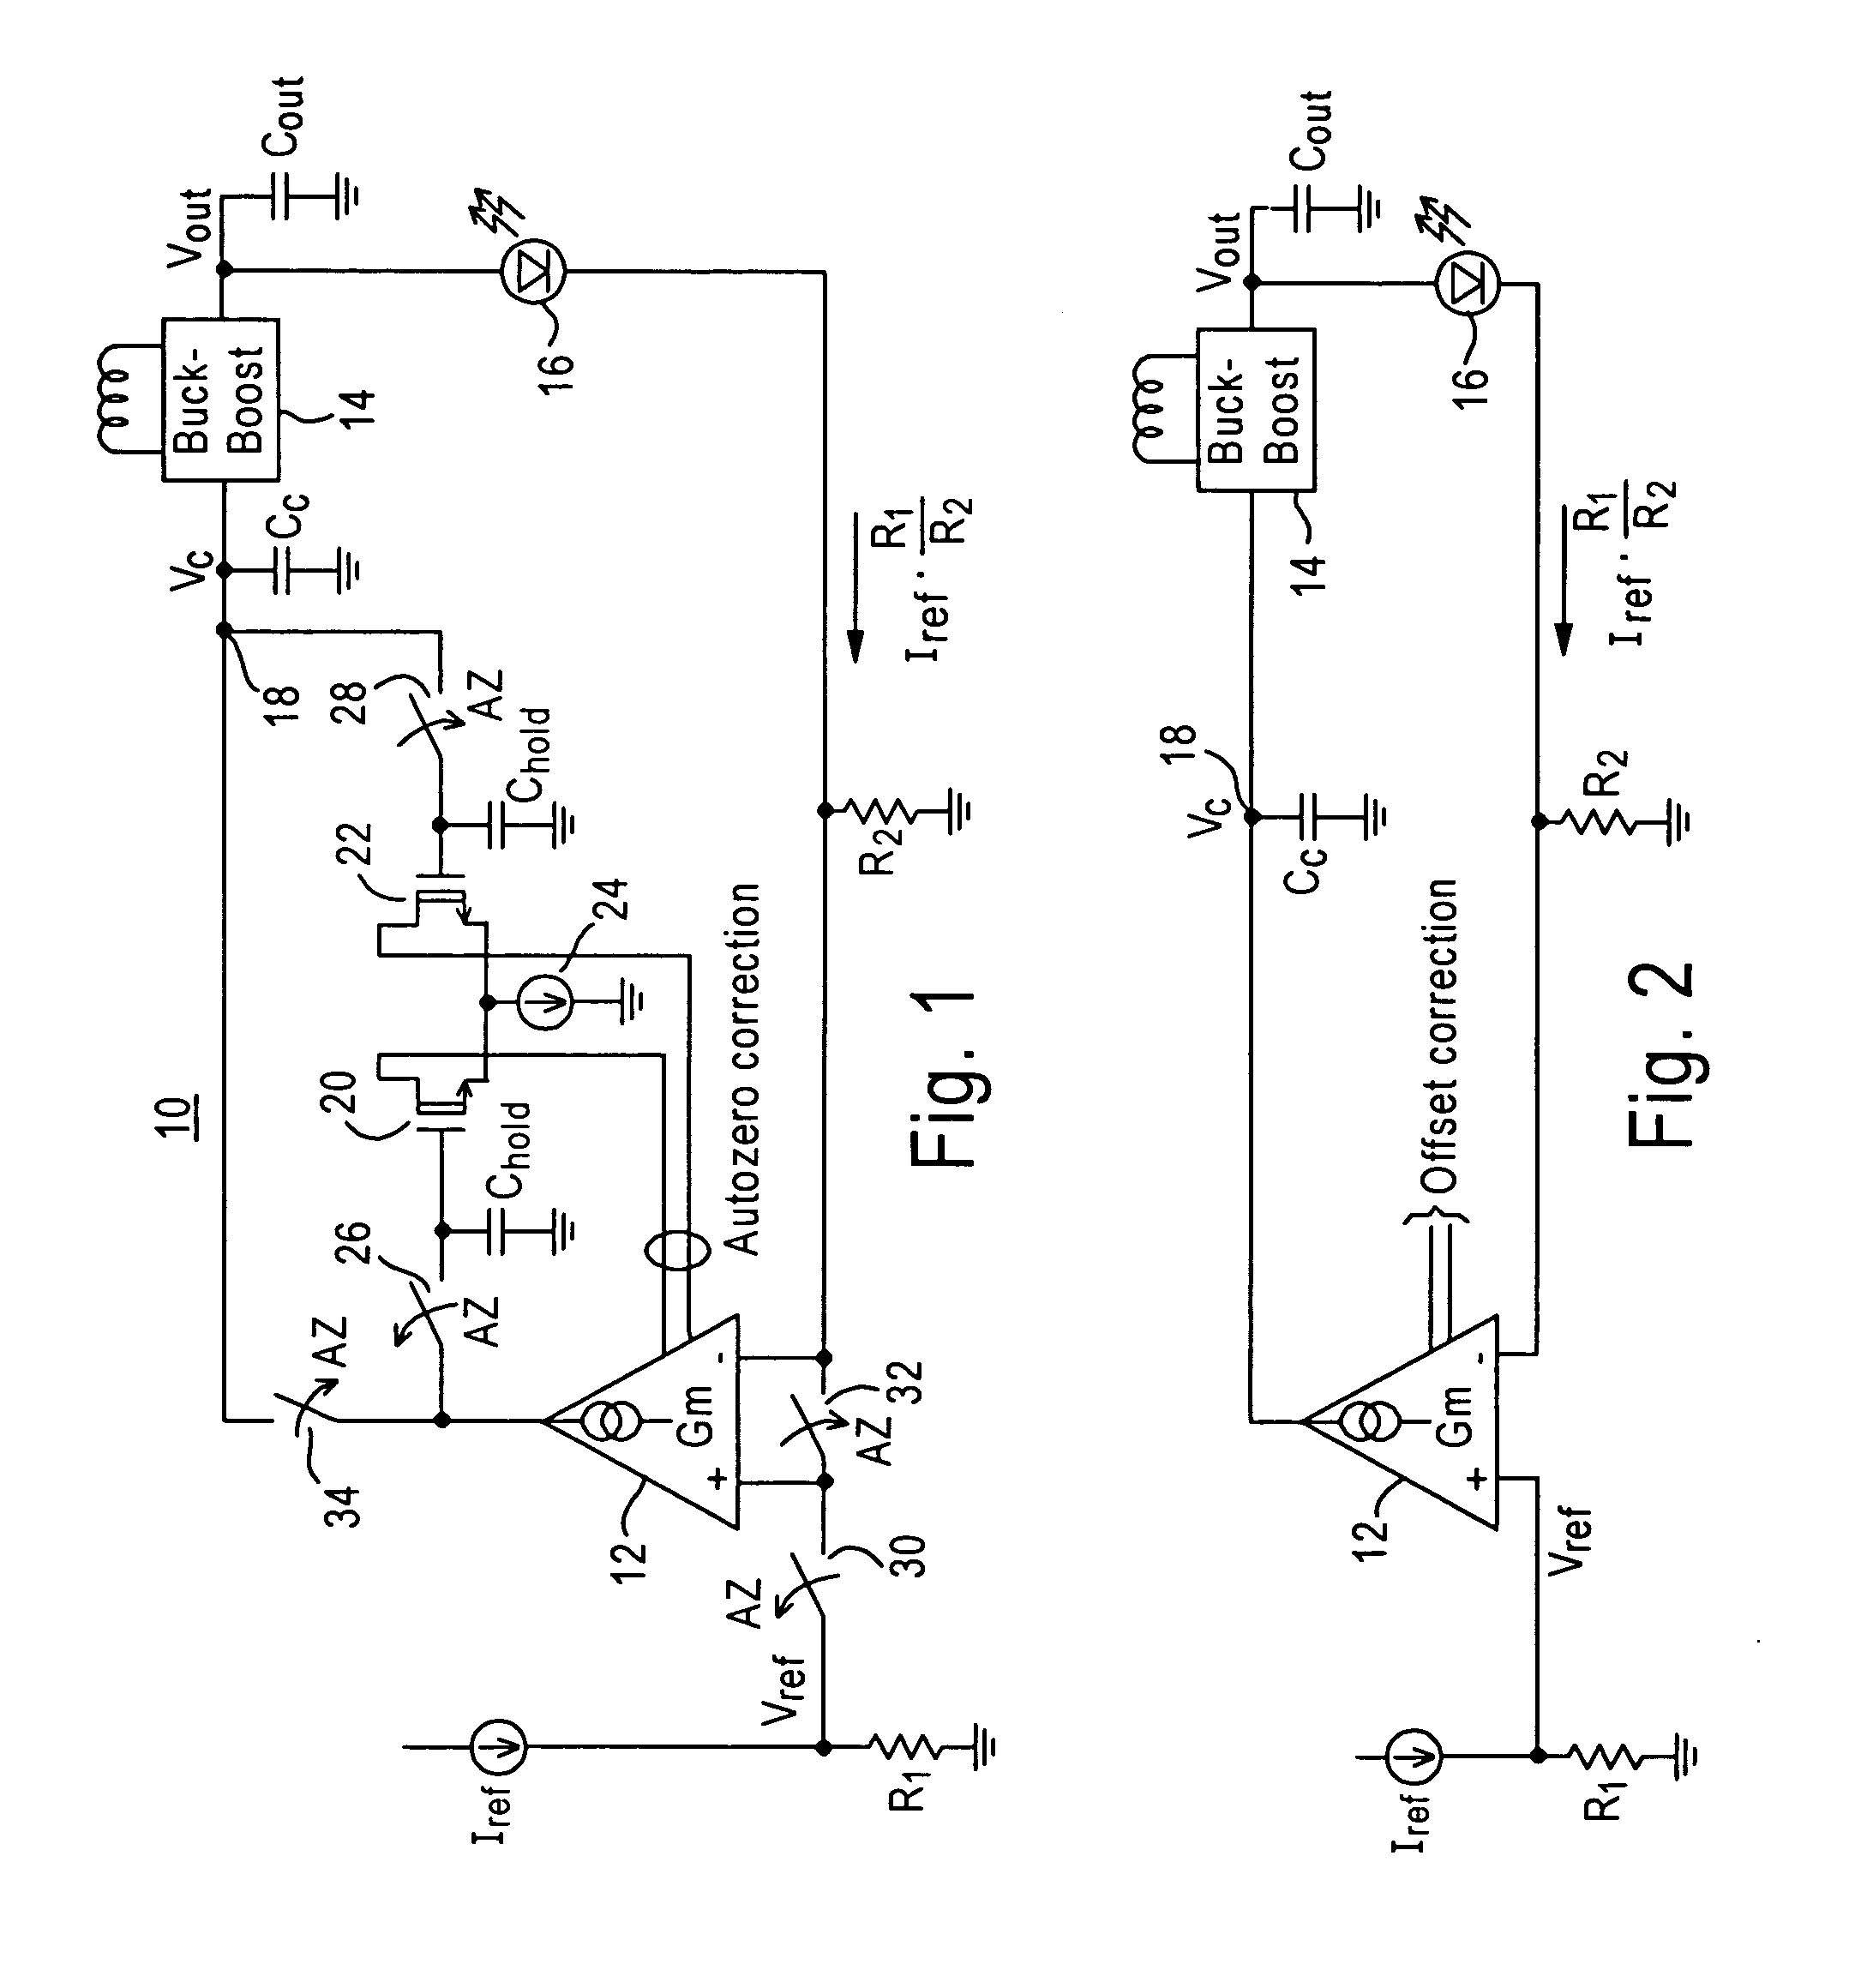 Offset correction circuit for voltage-controlled current source